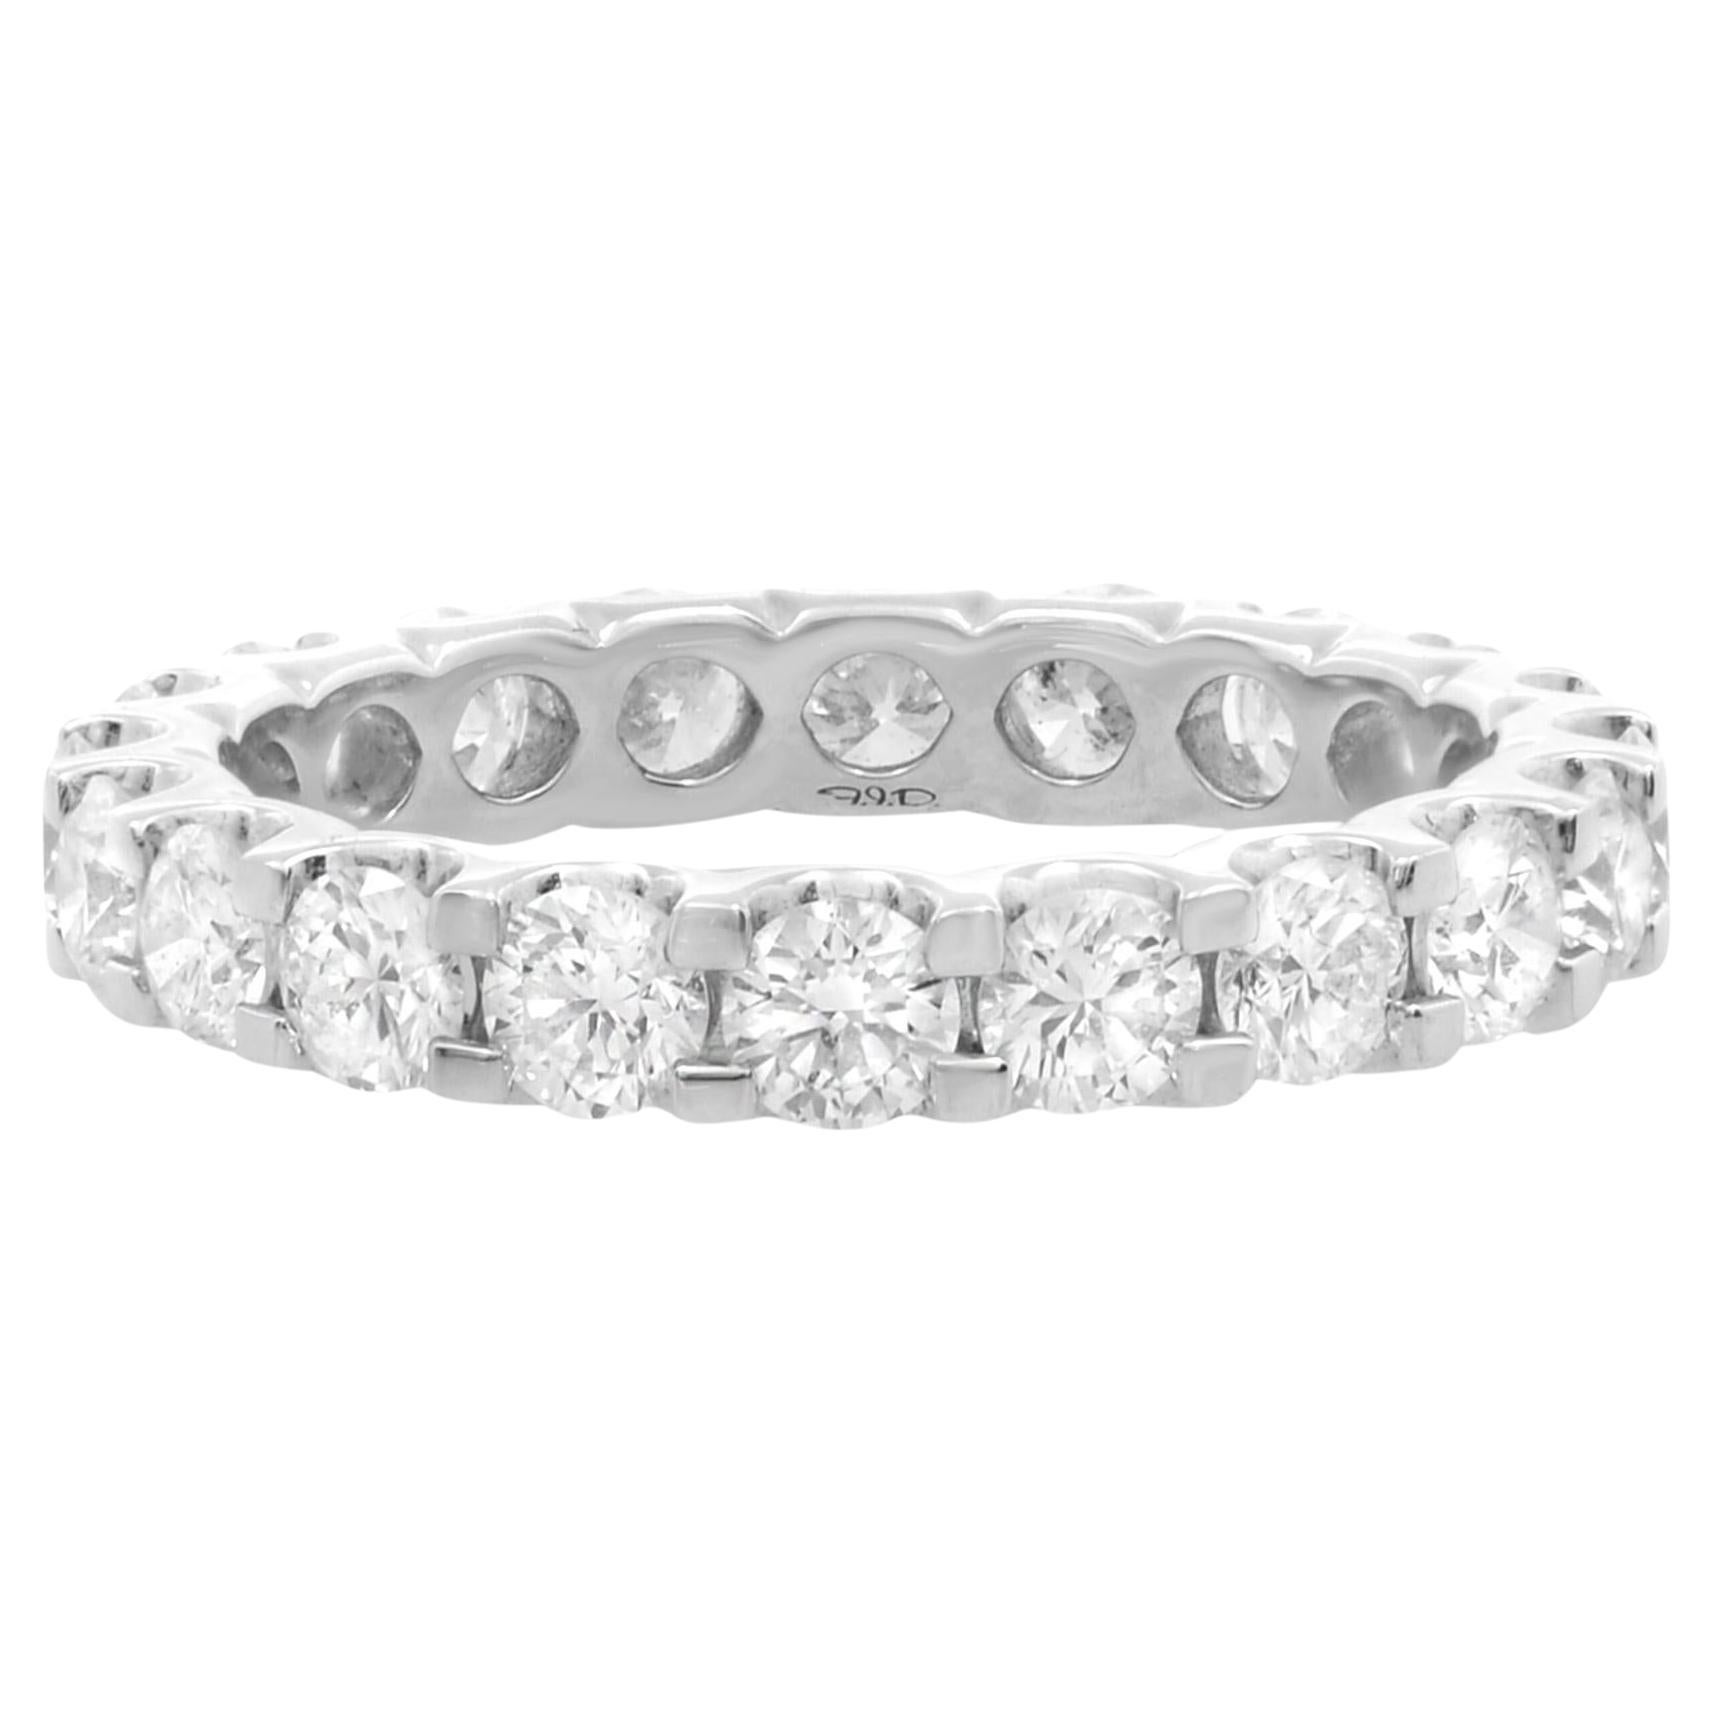 Eternity wedding band with shared prongs holding every stone in. With a total of 2 carats, each precious round diamond dances gleefully in the light, completely individual and yet tied together happily for eternity in white gold. The ring weighs 6.0